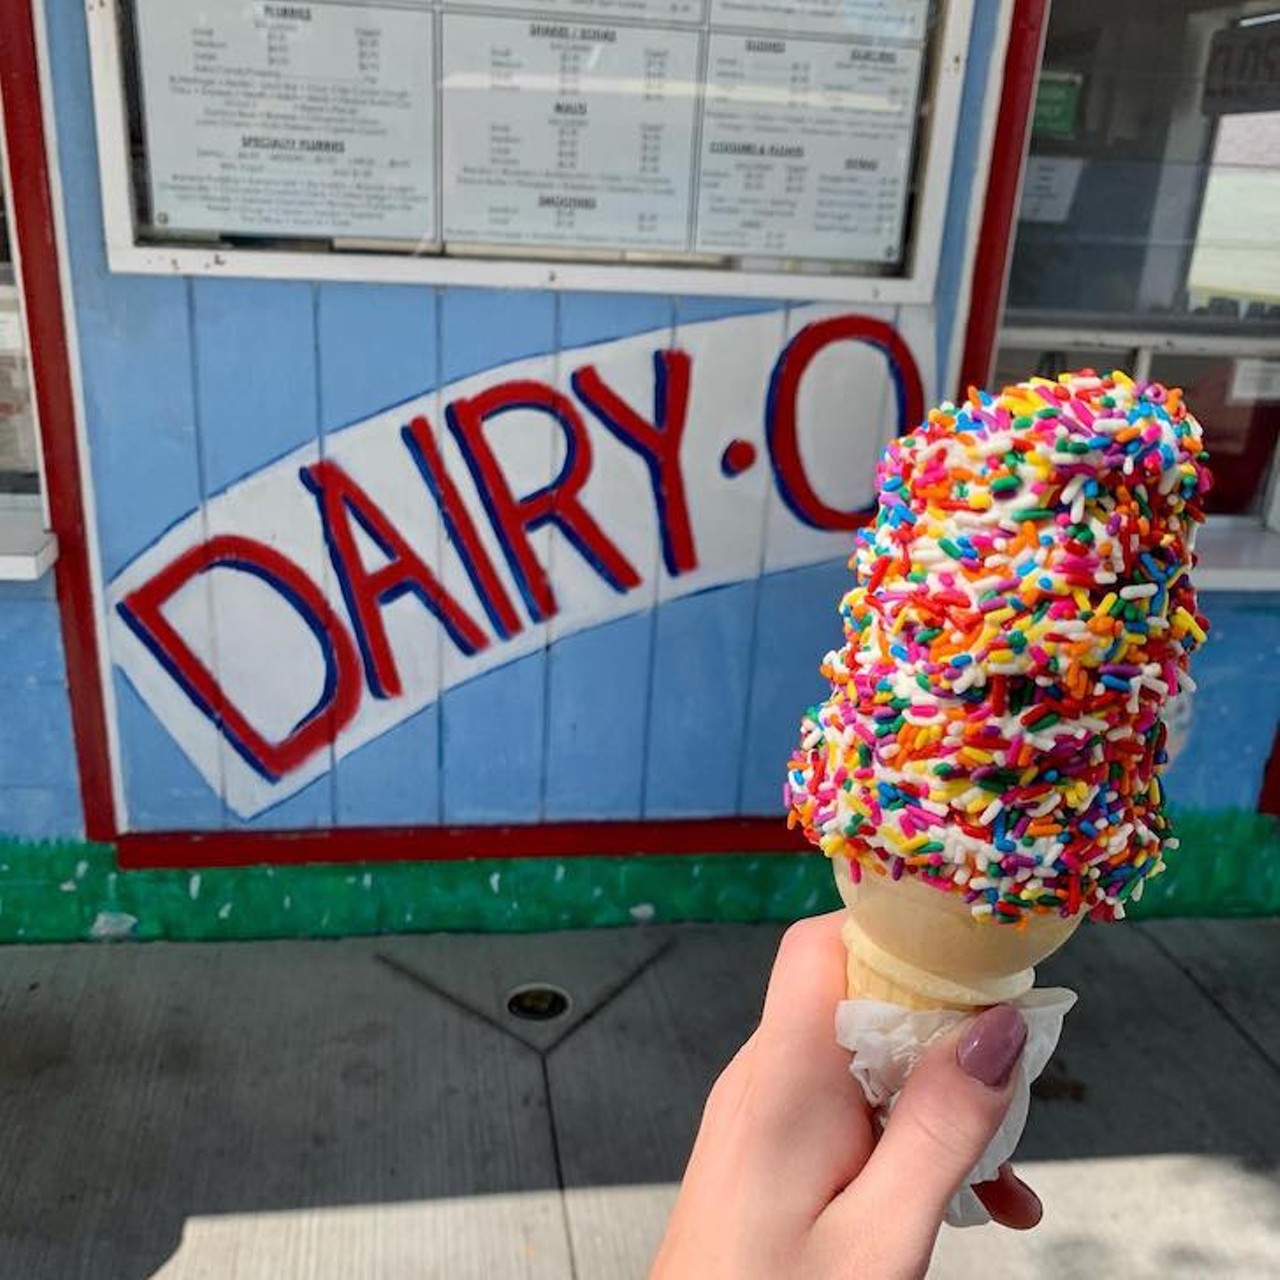 Dairy-O
208 S. Main St., Clawson; 248-916-7700 
Dairy-O is the  ice cream shop of your childhood dreams. Serving up cones, sundaes, floats, coolers, flurries, glaciers, slushies, and smoothies, all of which can be topped and drizzled upon.